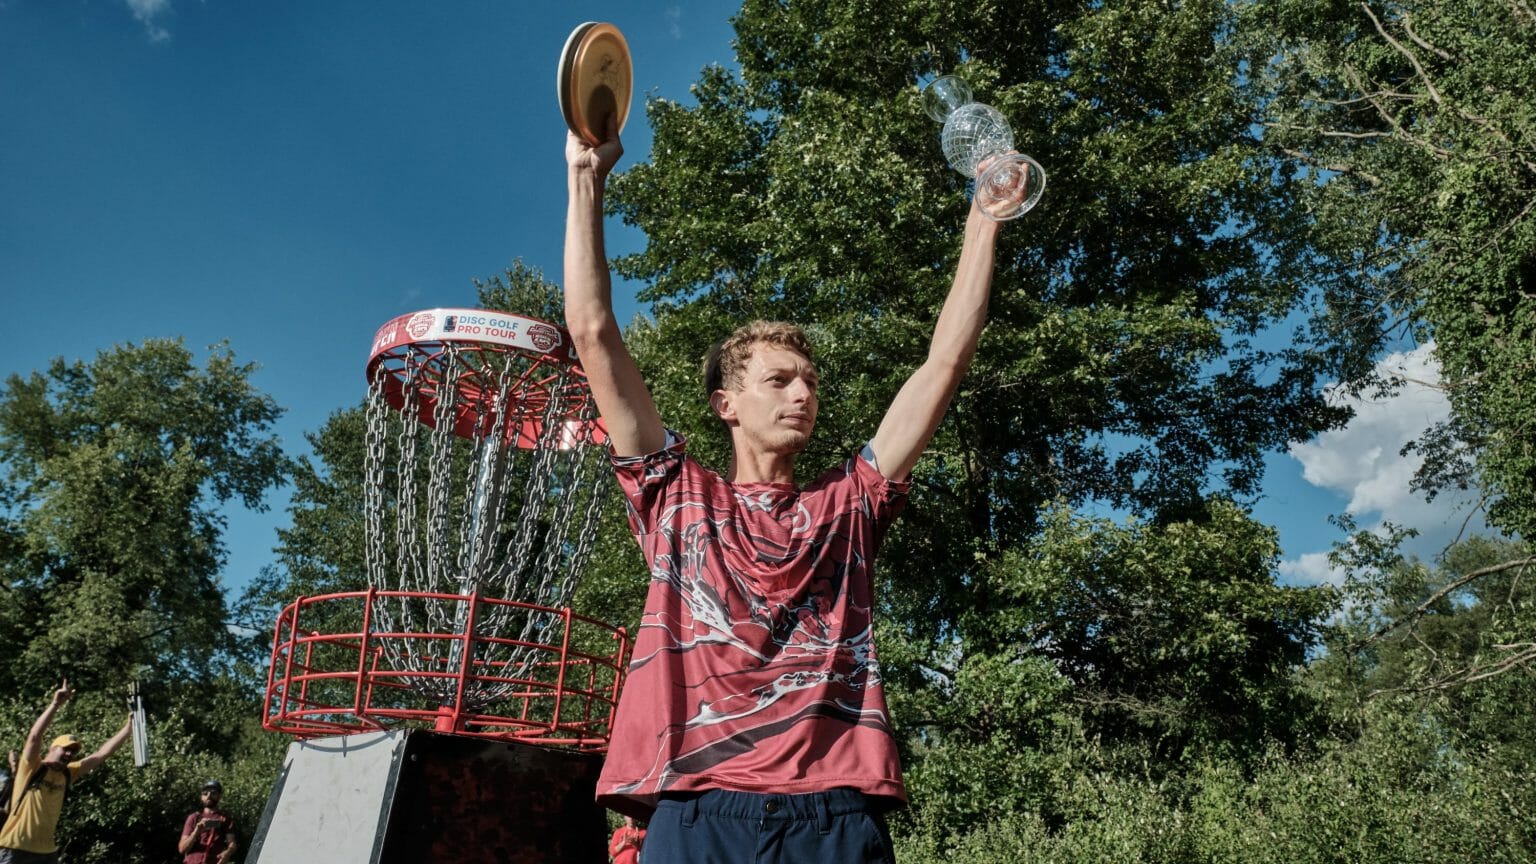 The Top 10 Storylines of the 2022 Discraft Great Lakes Open Ultiworld